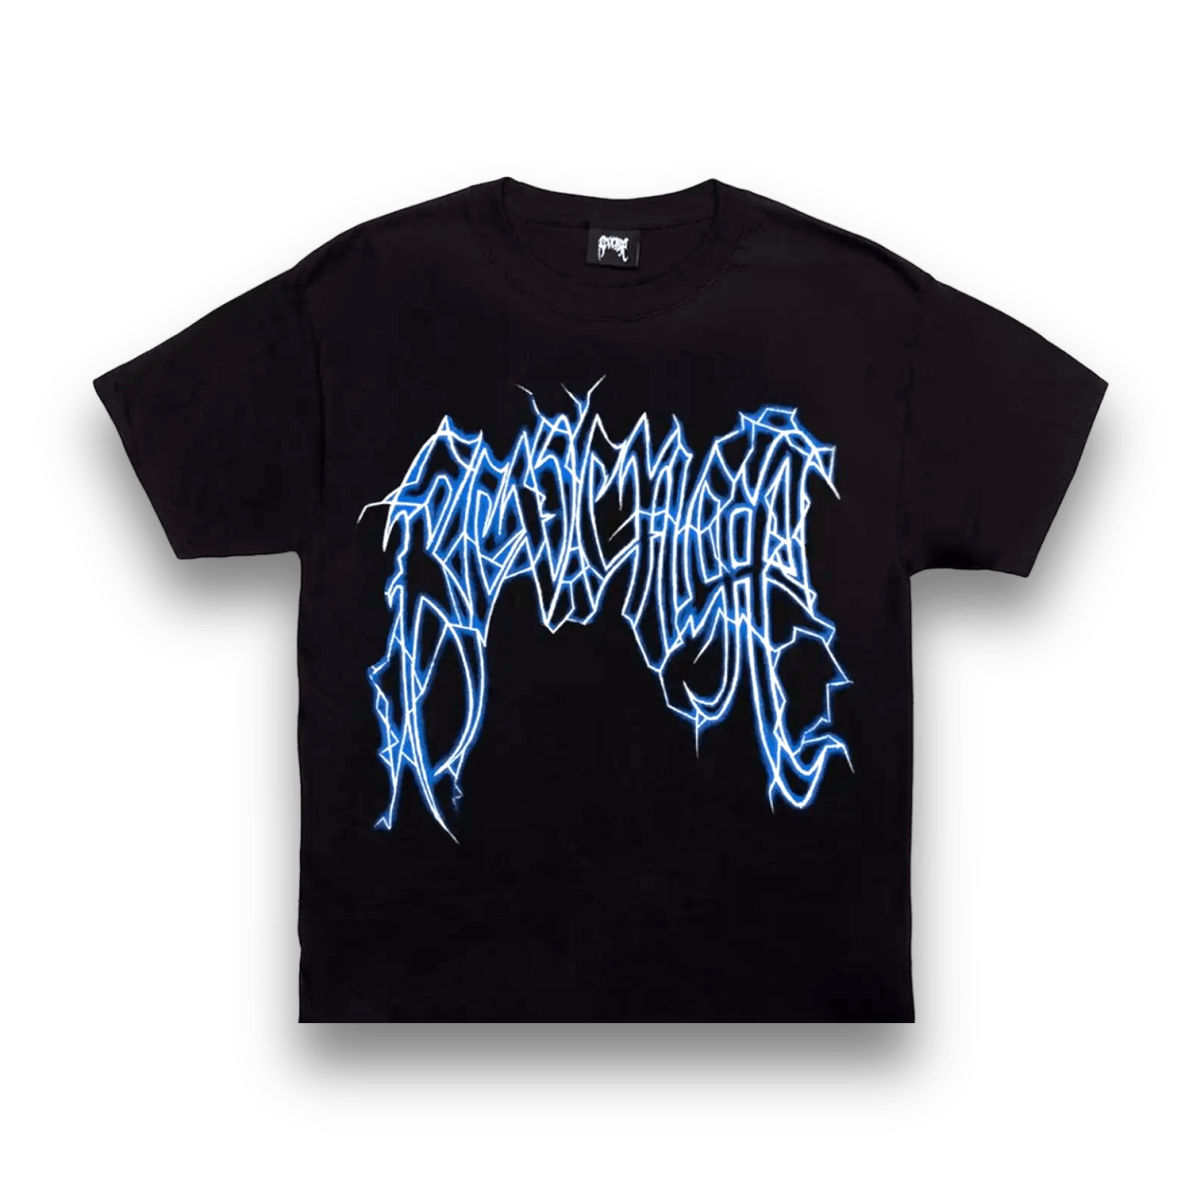 Revenge Tees Black with Blue Letters - T-Shirt - Jawns on Fire Sneakers & Streetwear